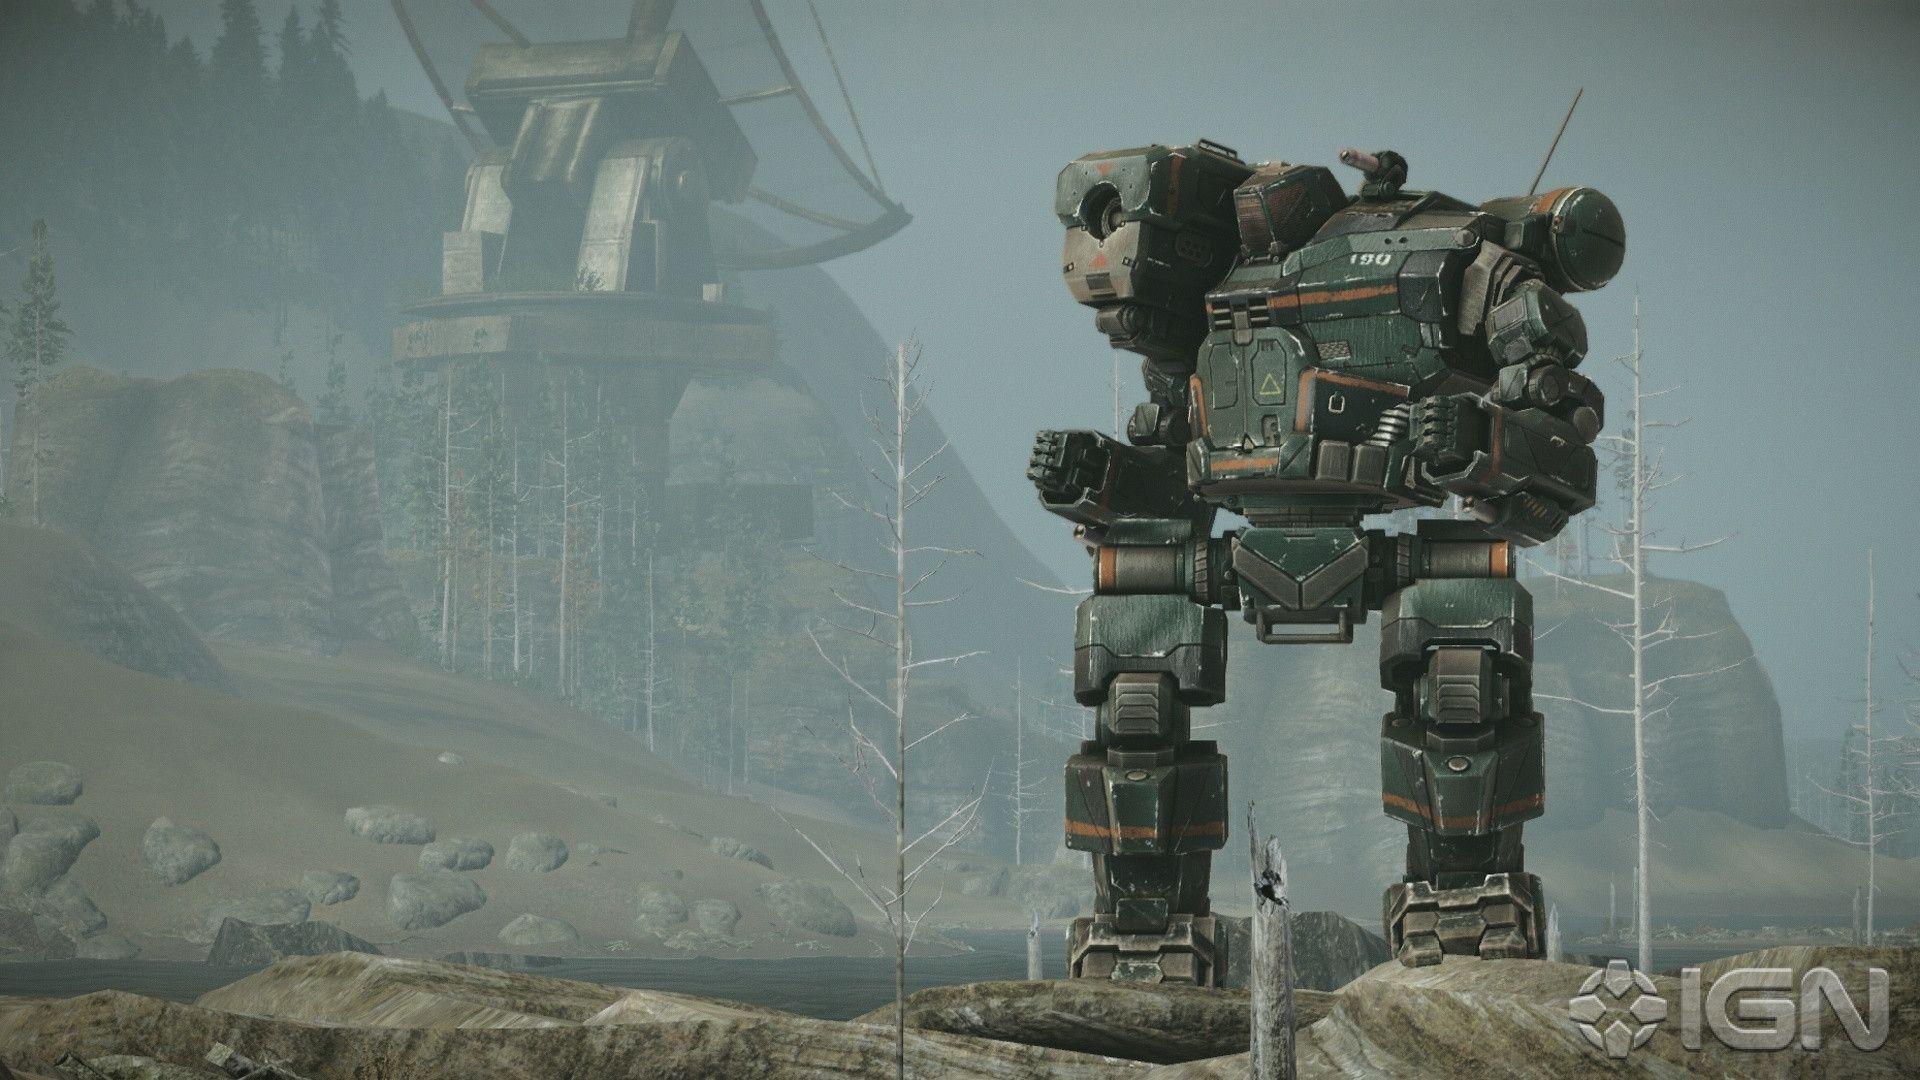 MechWarrior HD Wallpapers and Backgrounds Image.